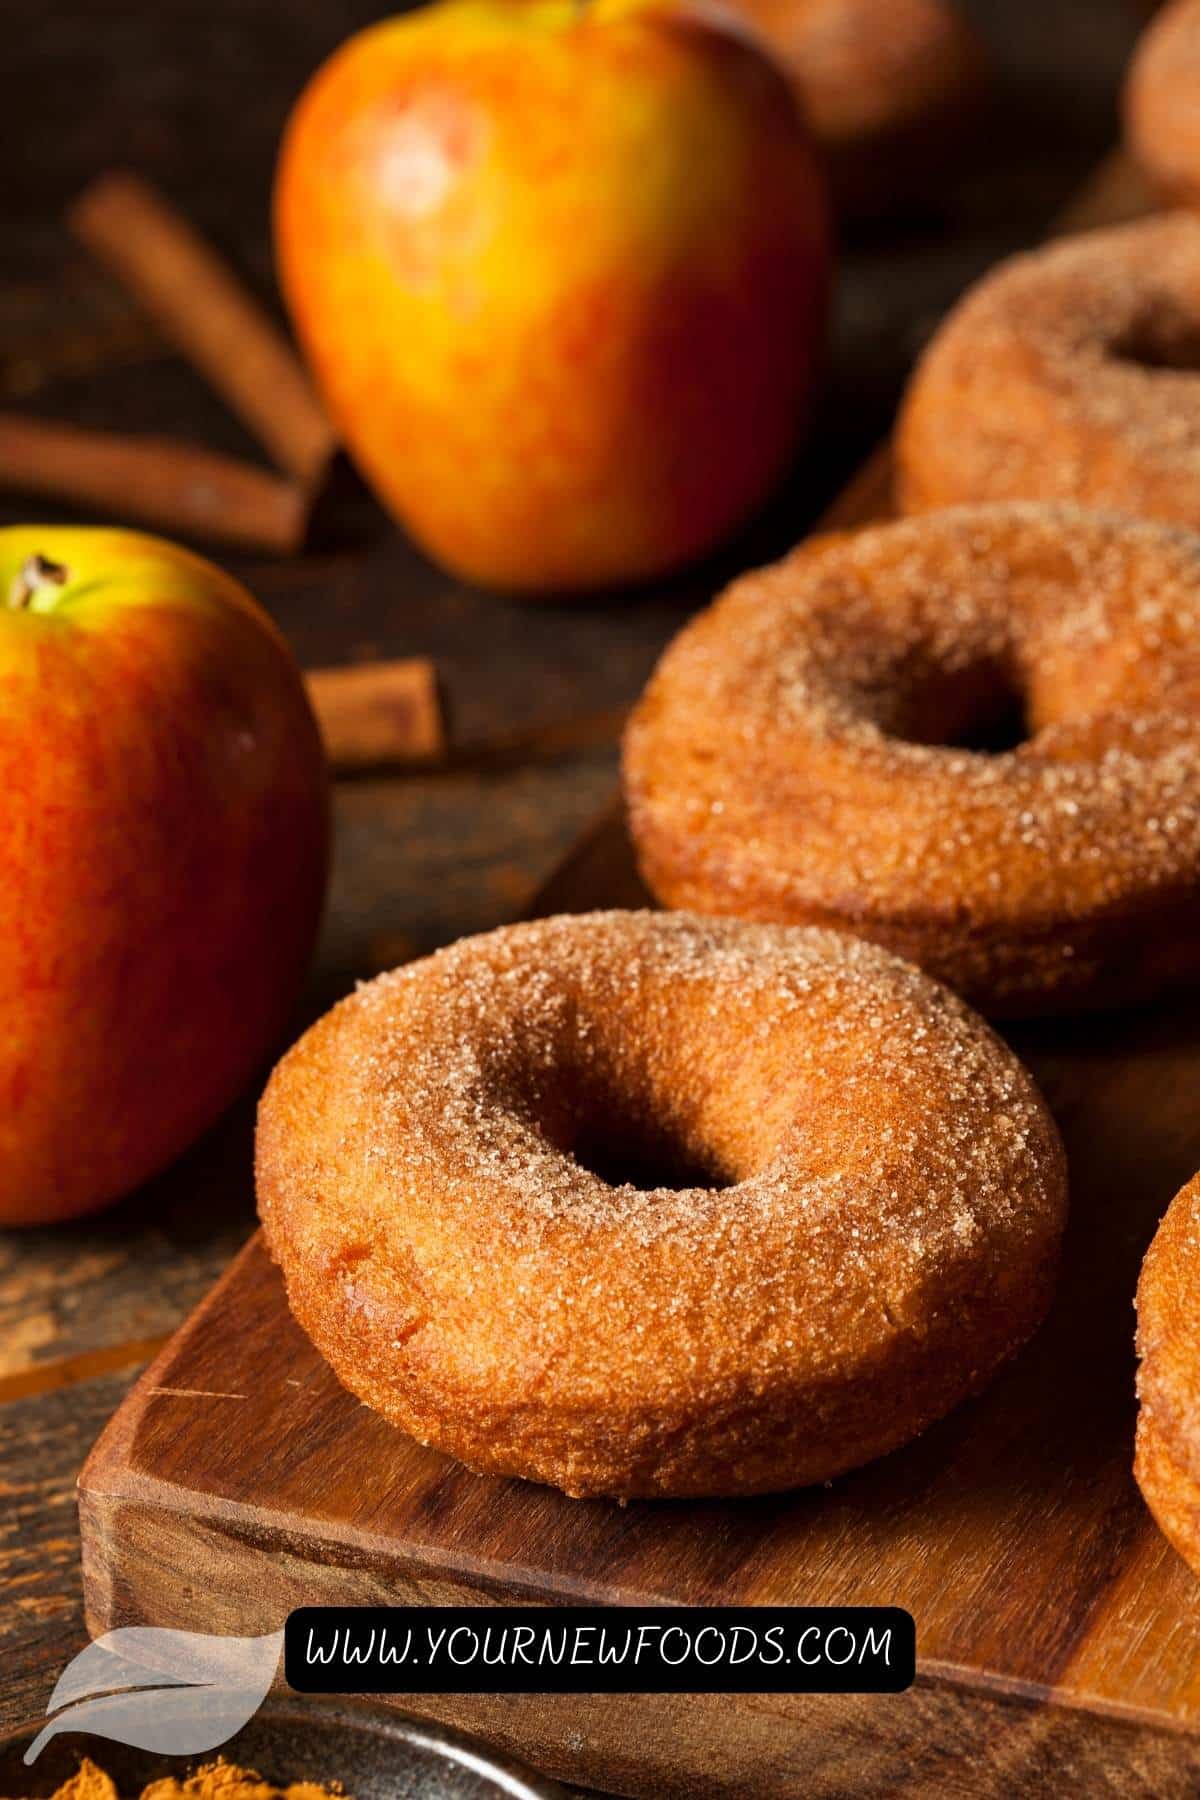 Homemade apple cider donuts on a wooden board